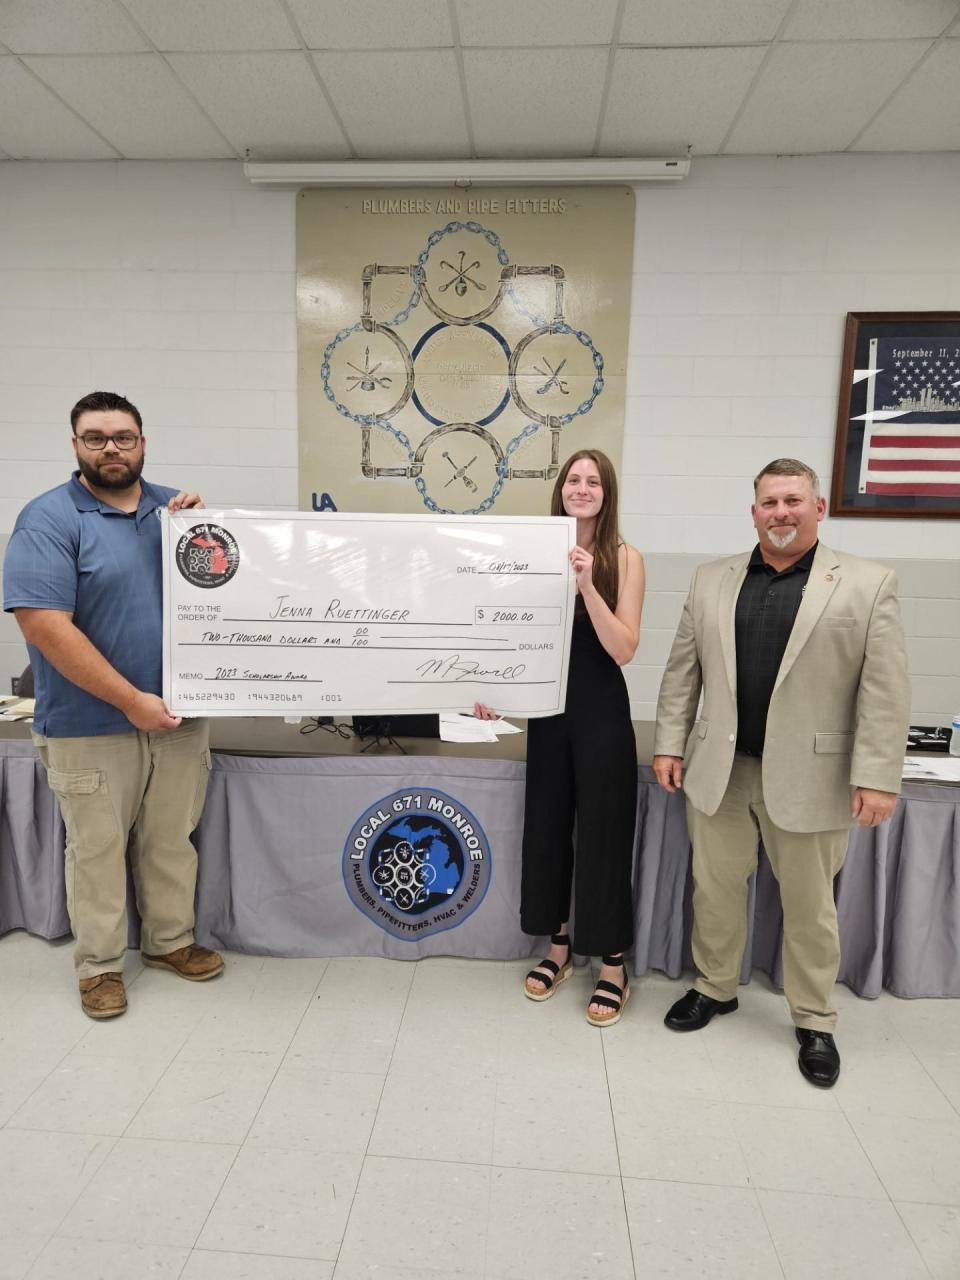 Jenna Ruettinger of Monroe received a $2,000 scholarship from UA Local 671 Plumbers and Pipefitters in Monroe.